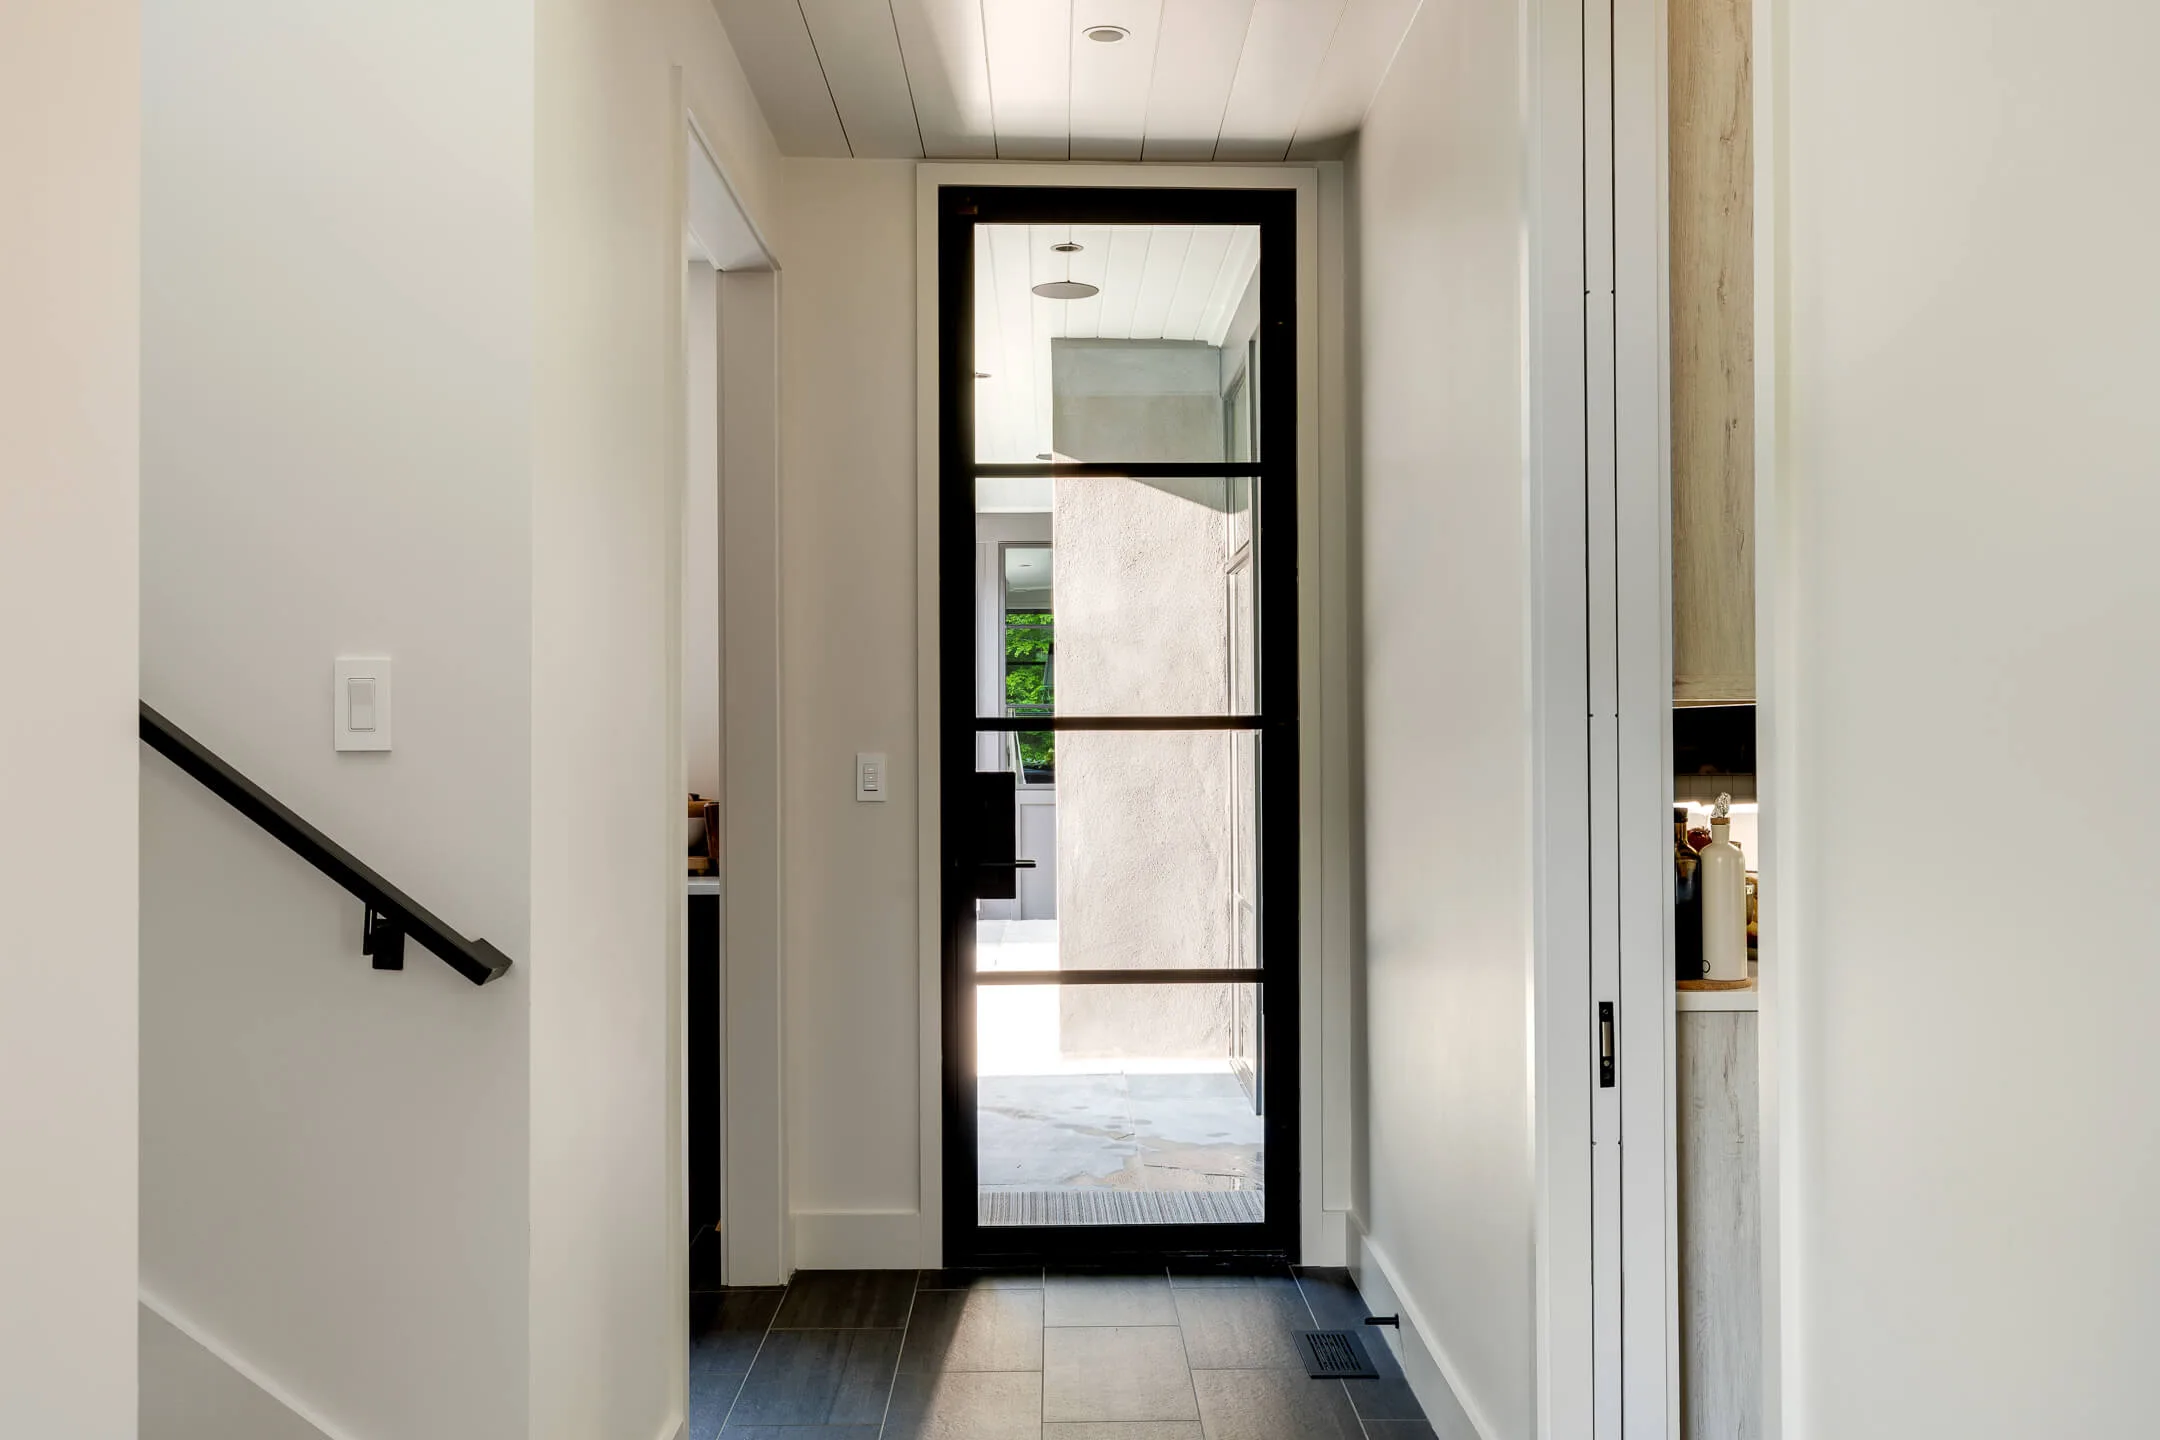 The Pros And Cons Of Iron And Steel Entry Doors, Glass Doors And Wood Doors